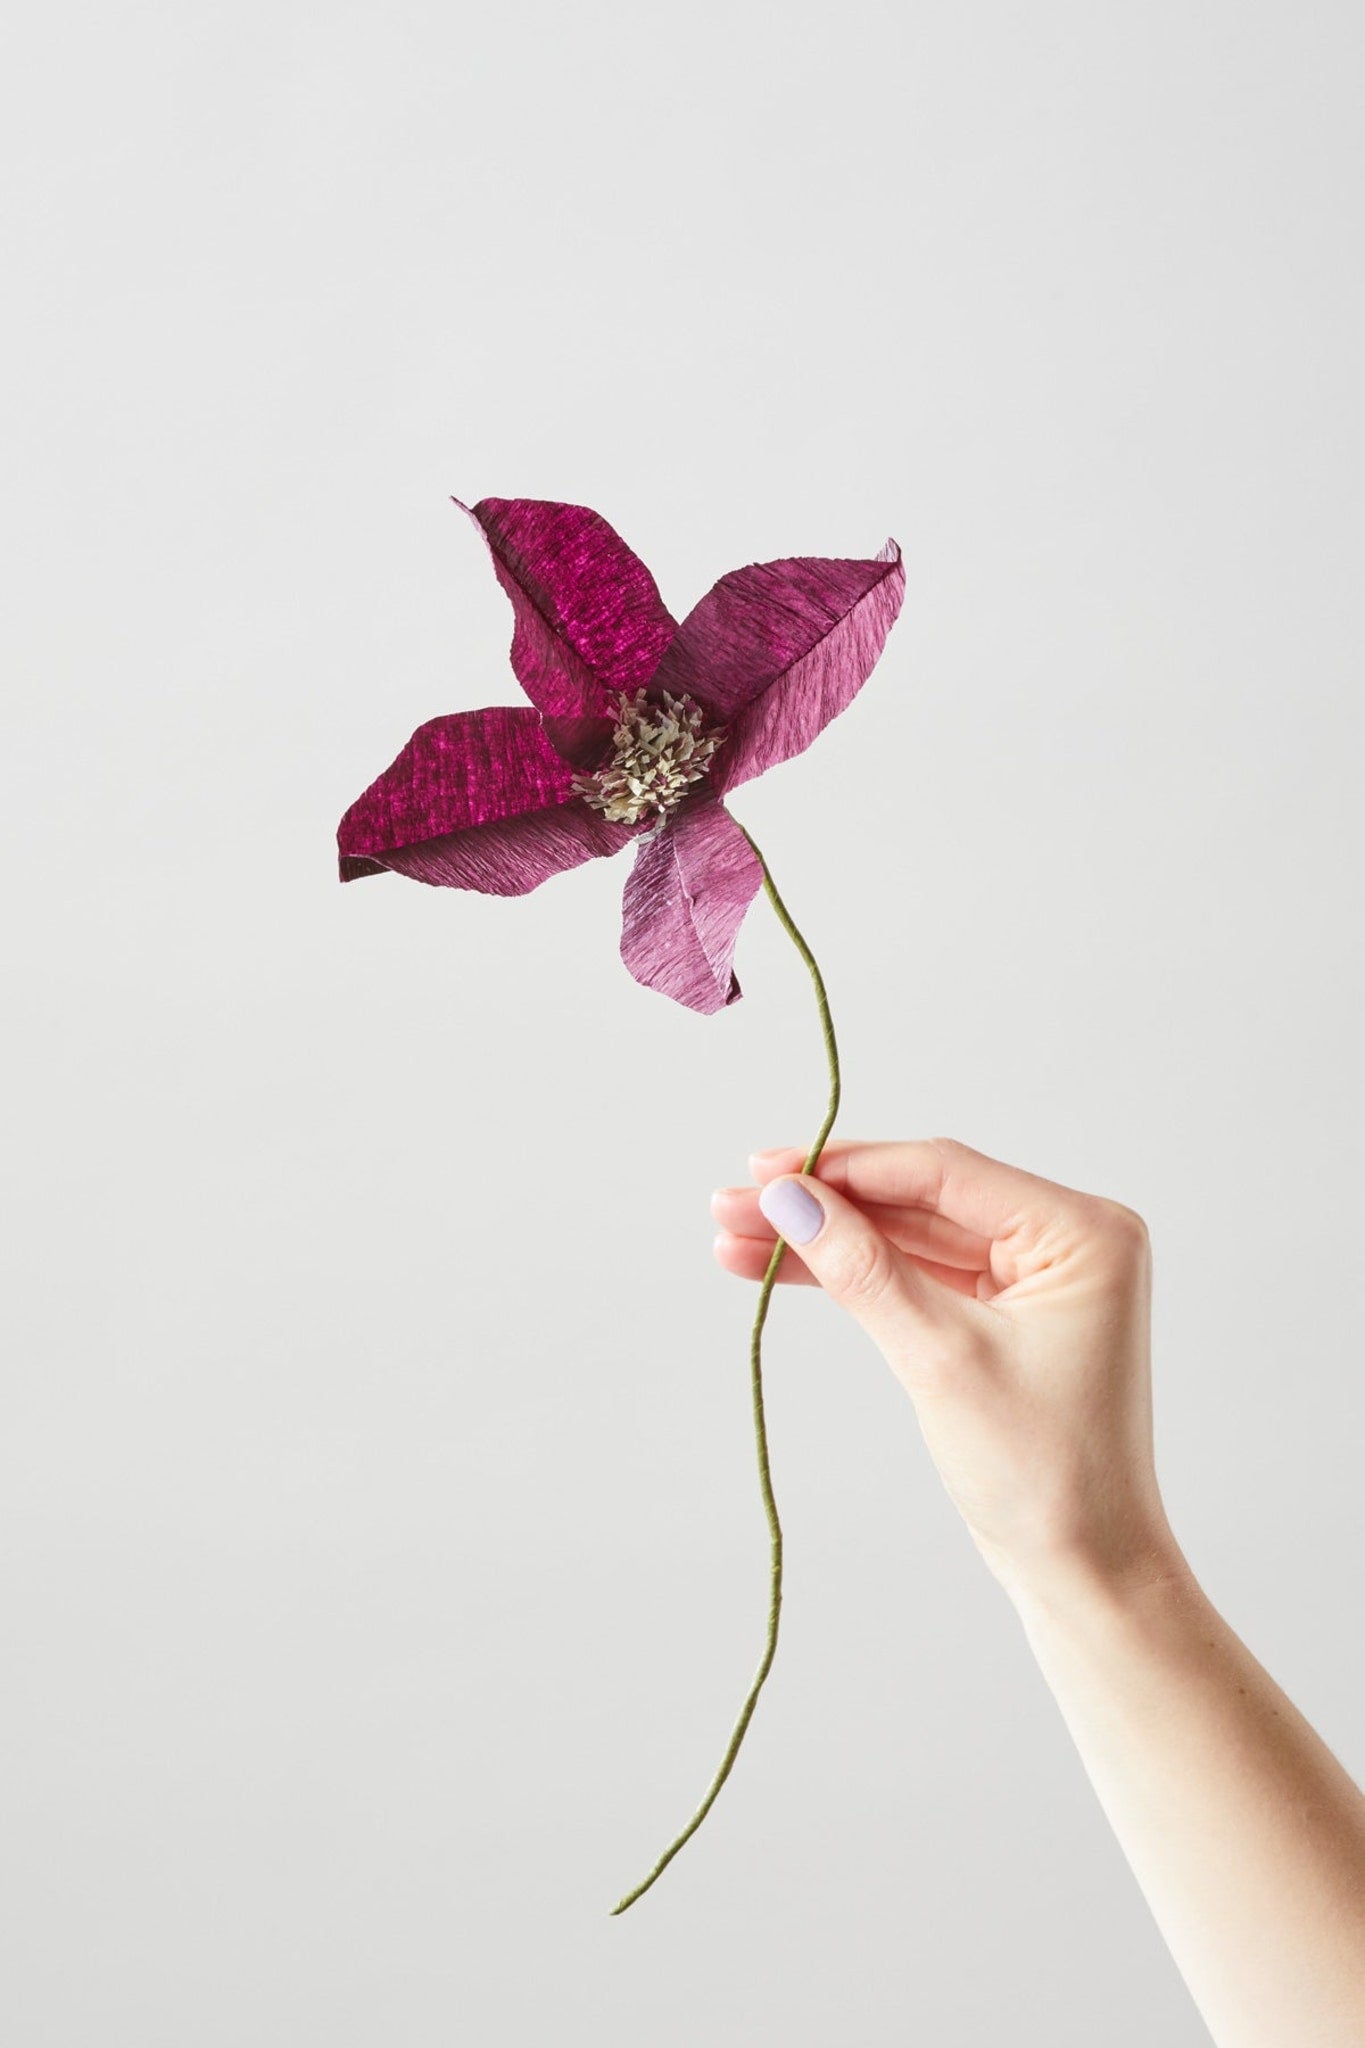 Paper Flowers: The Global, Ancient Roots of a Contemporary Maker